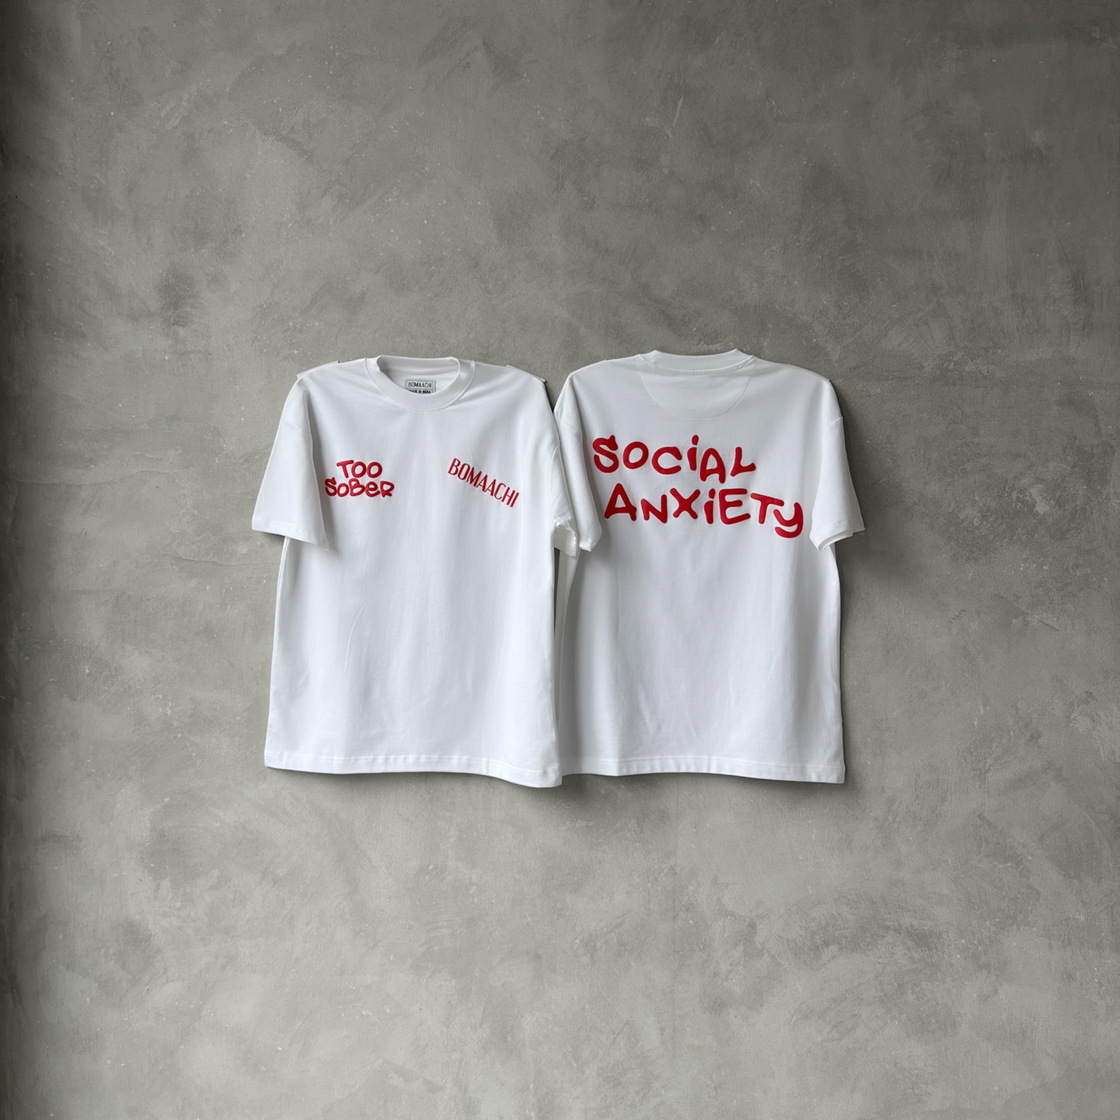 TOO SOBER & SOCIAL ANXIETY WHITE T-SHIRT